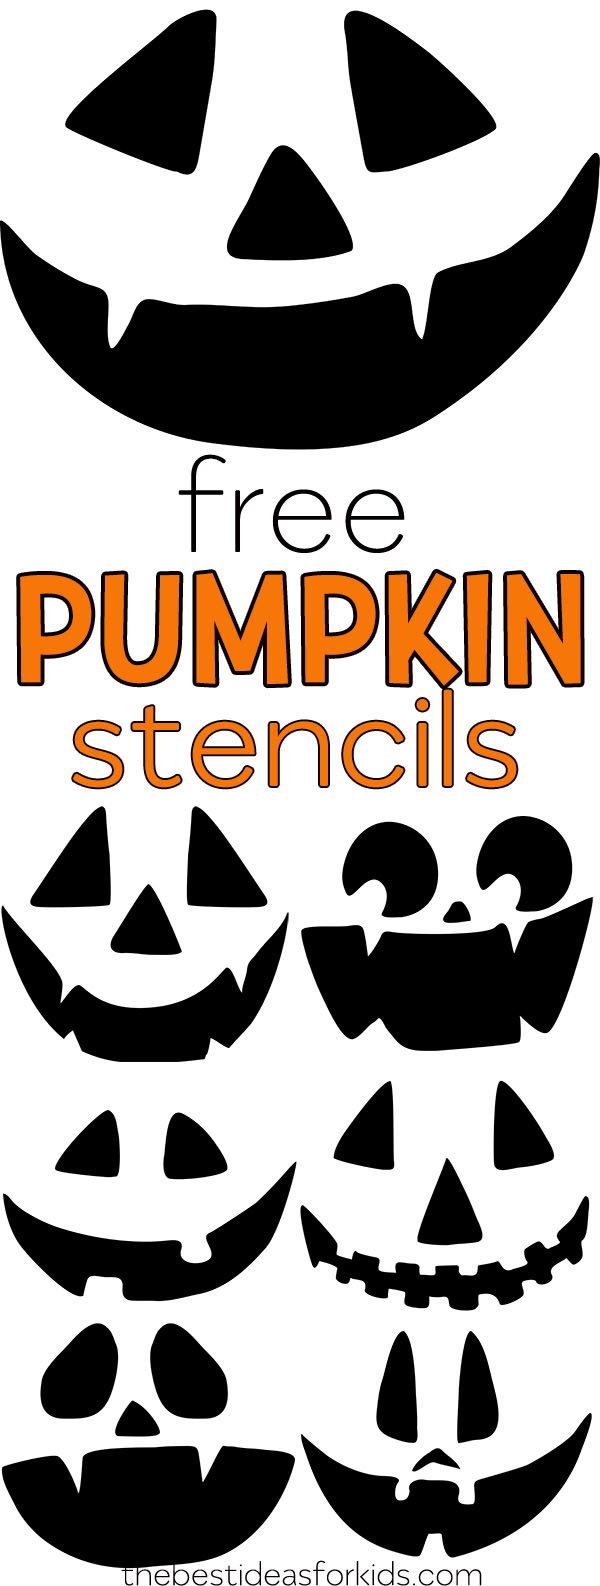 pumpkin-carving-stencils-free-printables-the-best-ideas-for-kids